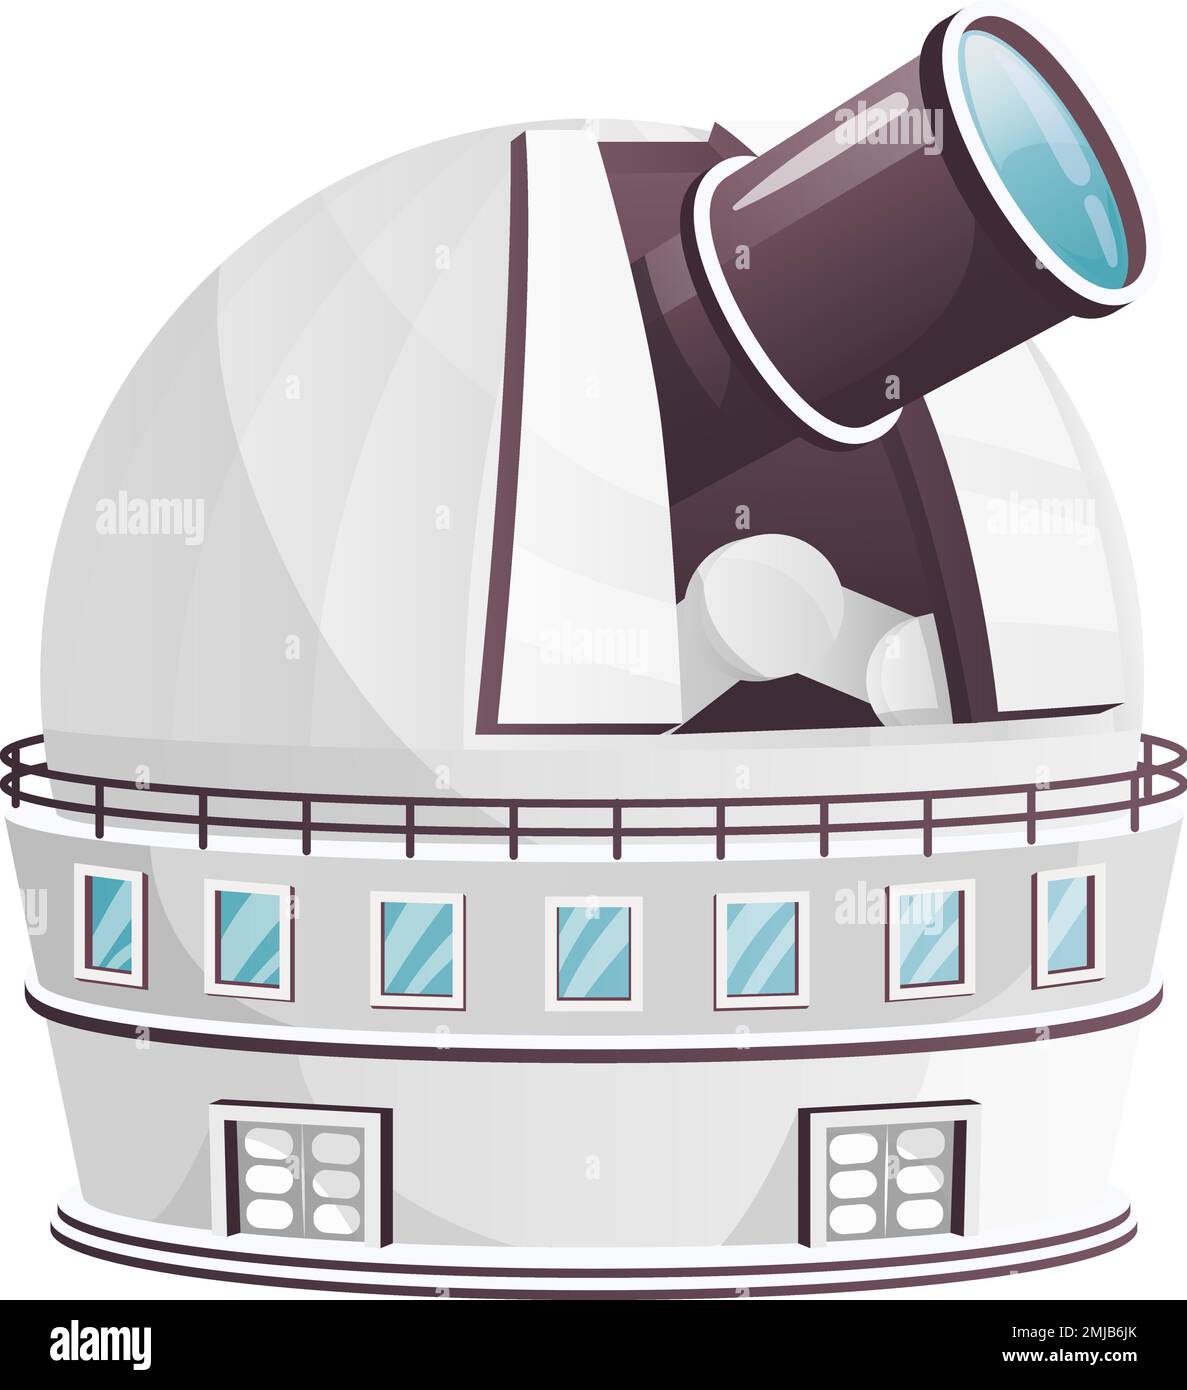 Astronomical buiding with big telescope. Cartoon observatory icon isolated on white background Stock Vector